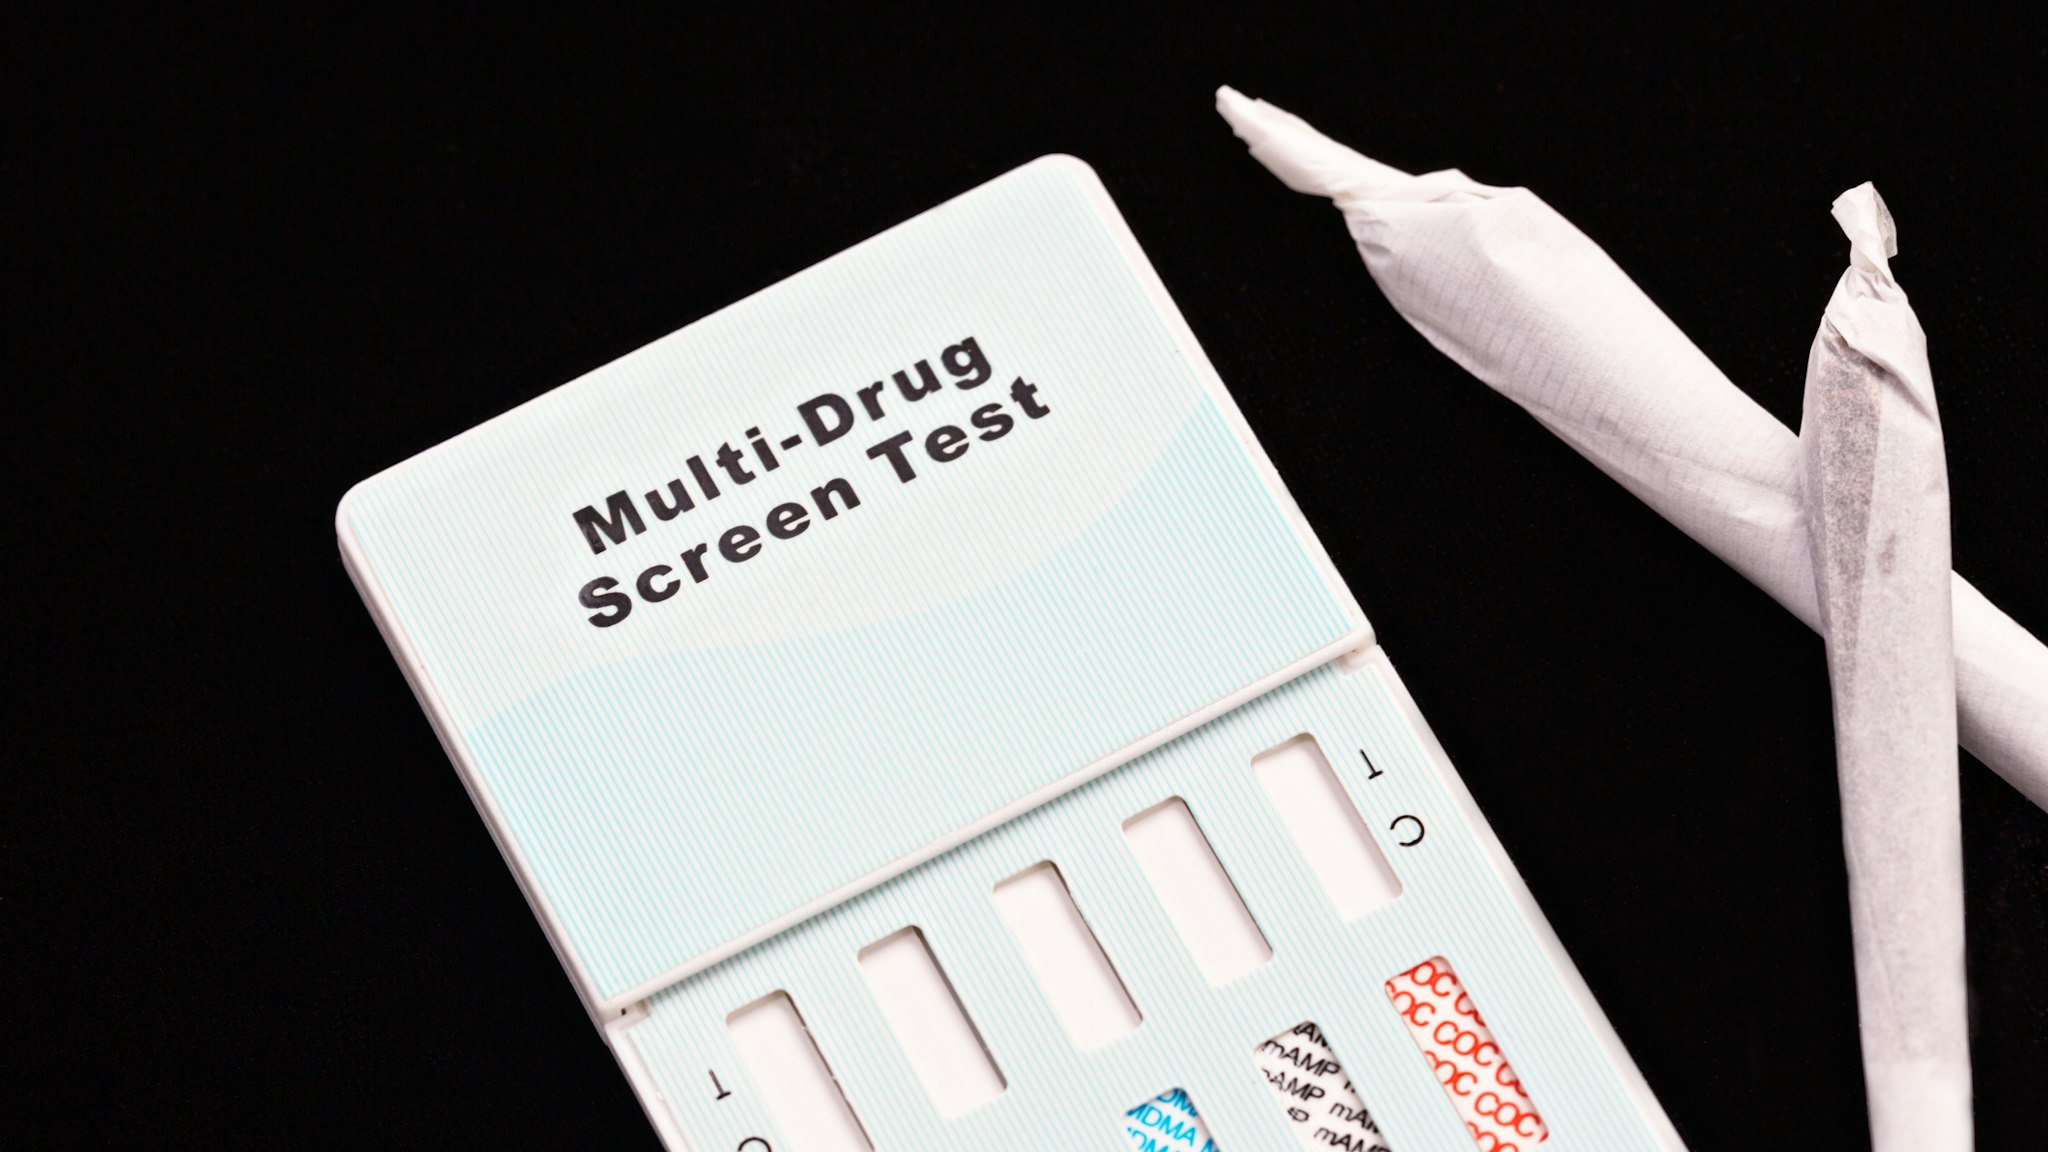 A multi-drug urine testing kit, designed for use at home, sits next to two hand-rolled marijuana cigarettes.